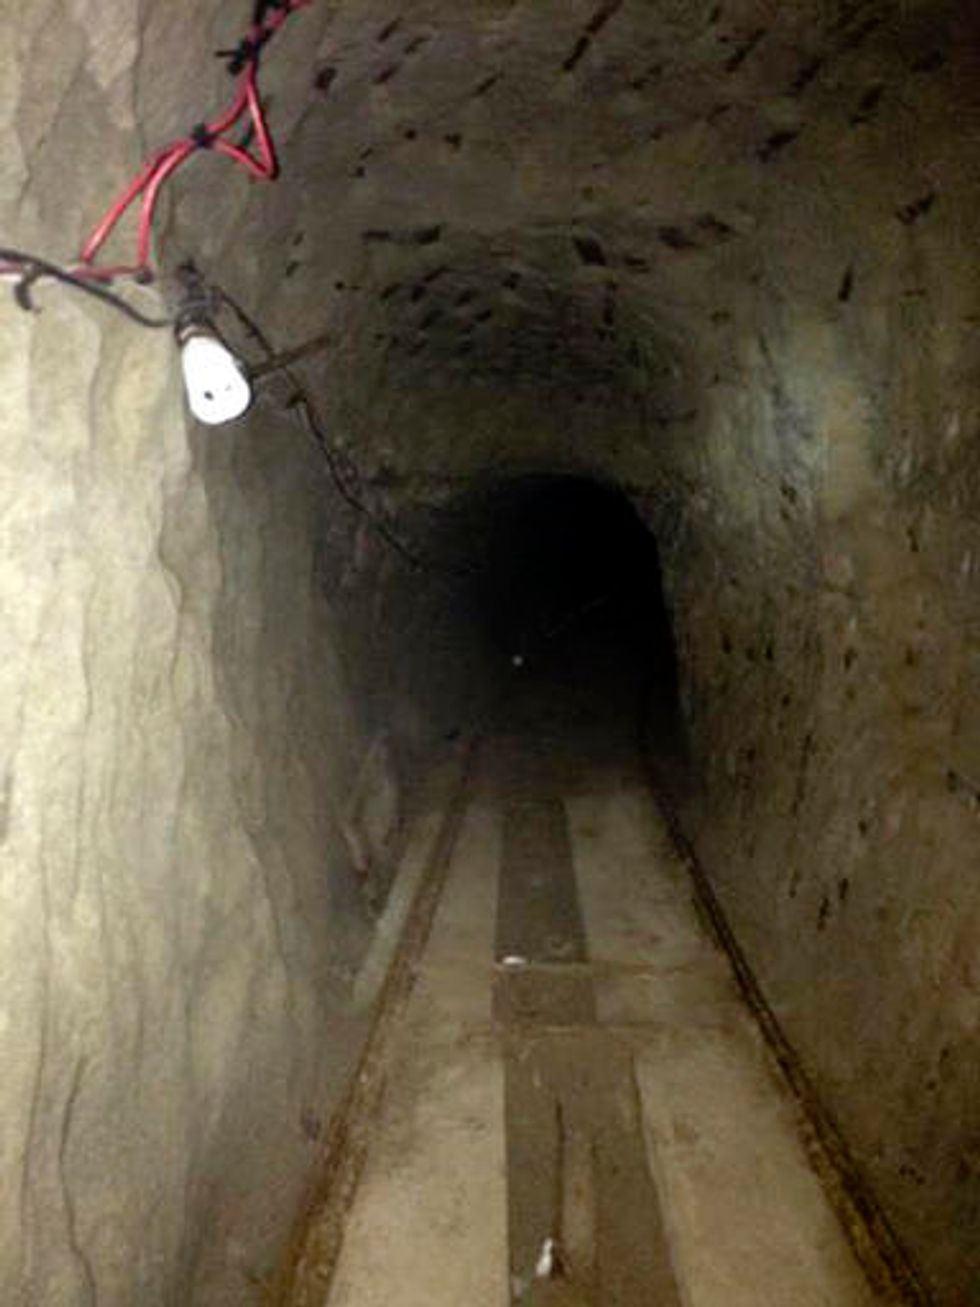 Feds Seize Tons of Cocaine, Marijuana in Longest Cross-Border Drug Smuggling Tunnel Ever Discovered in California